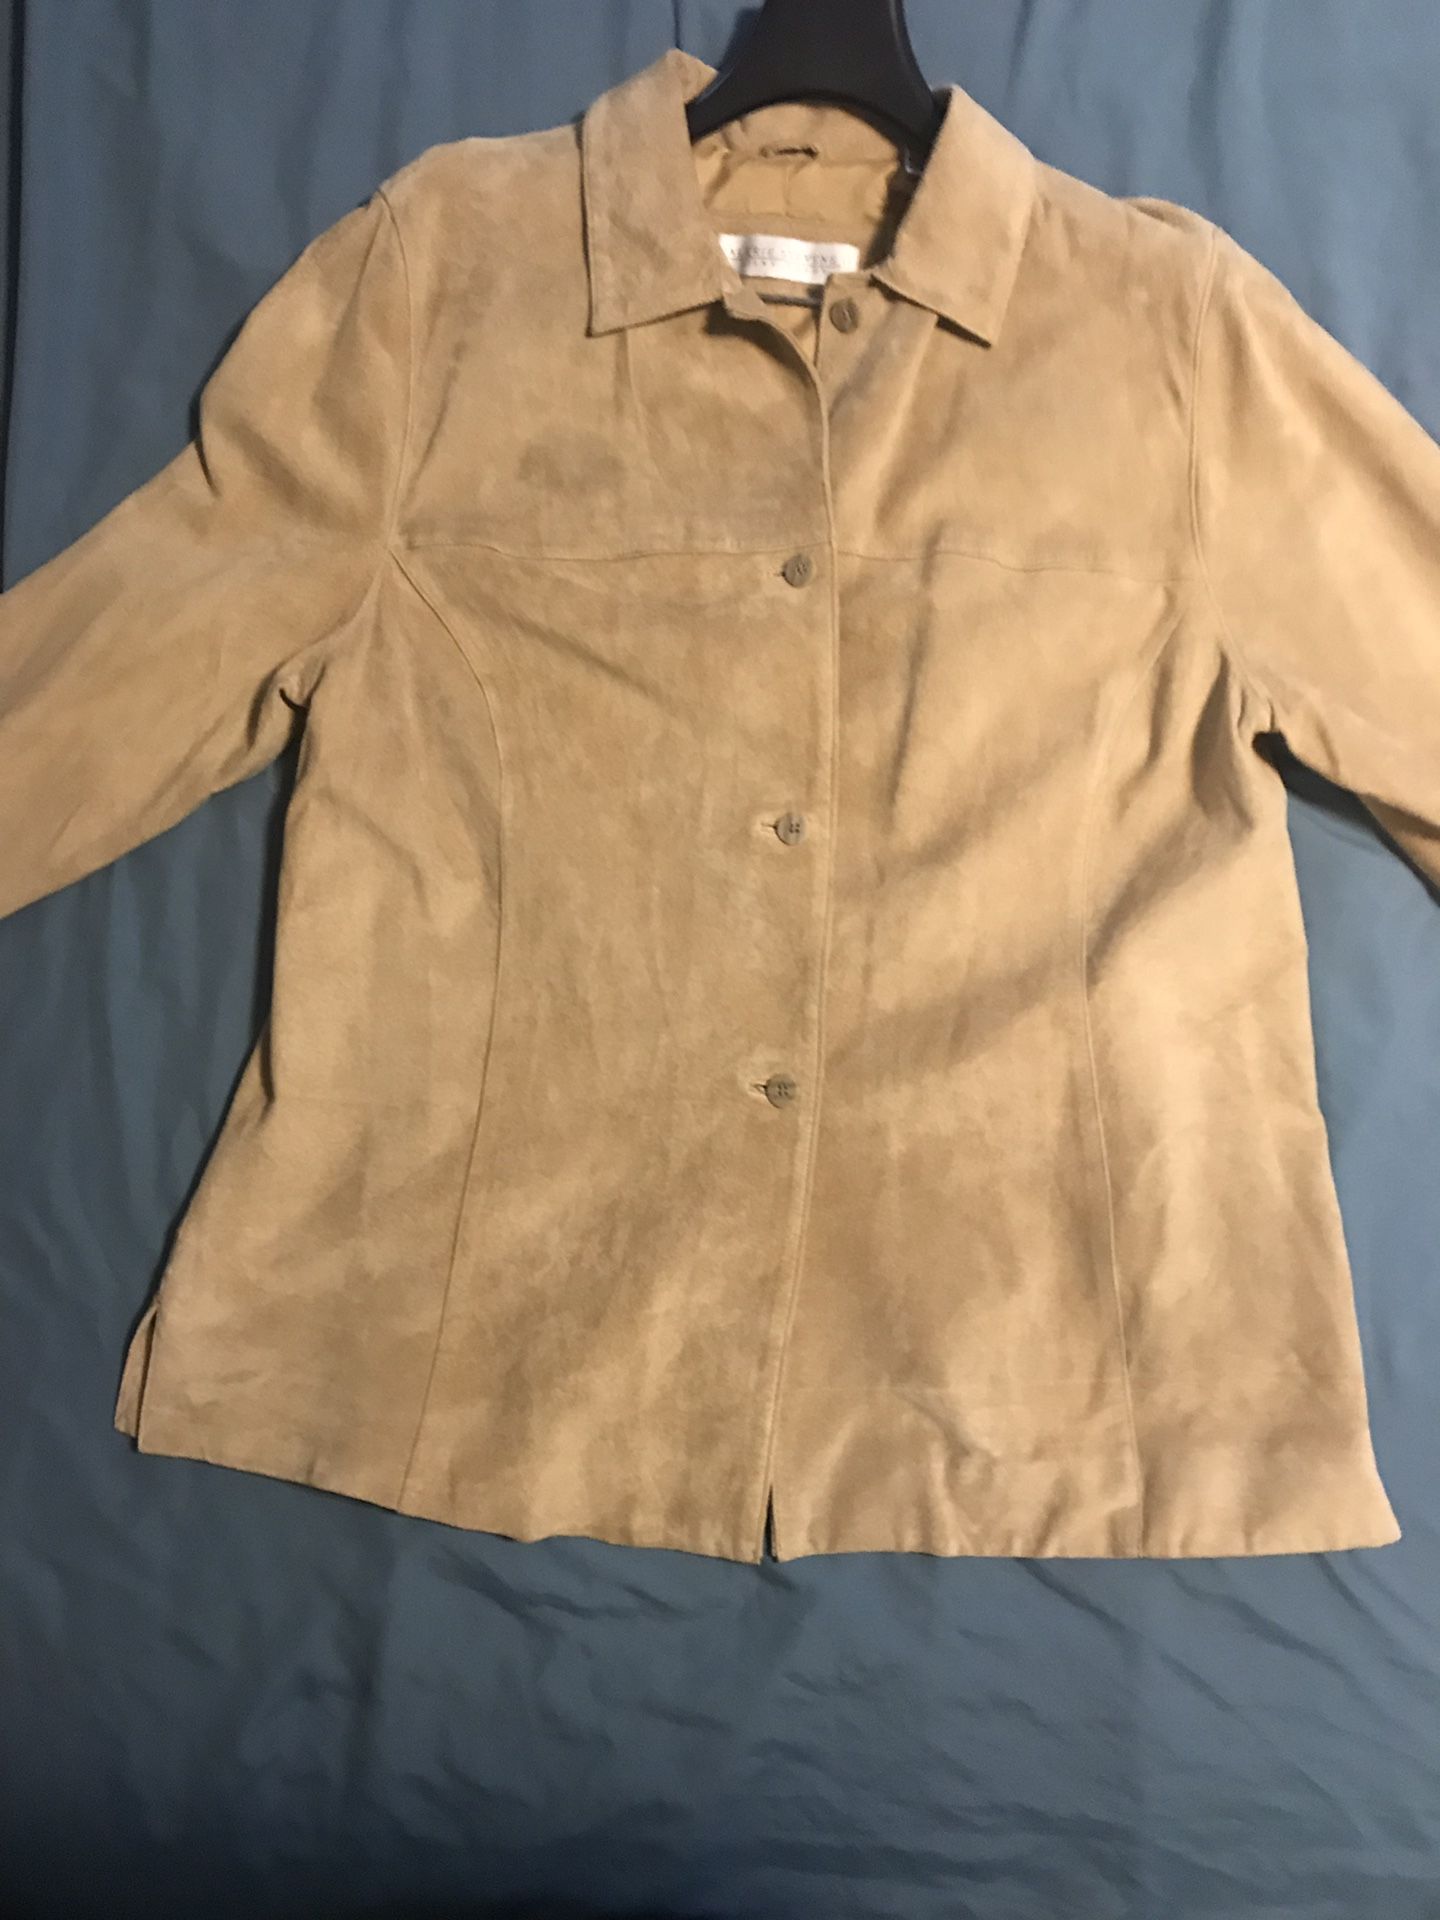 Suede Shirt Jacket Brand New Tags Still On